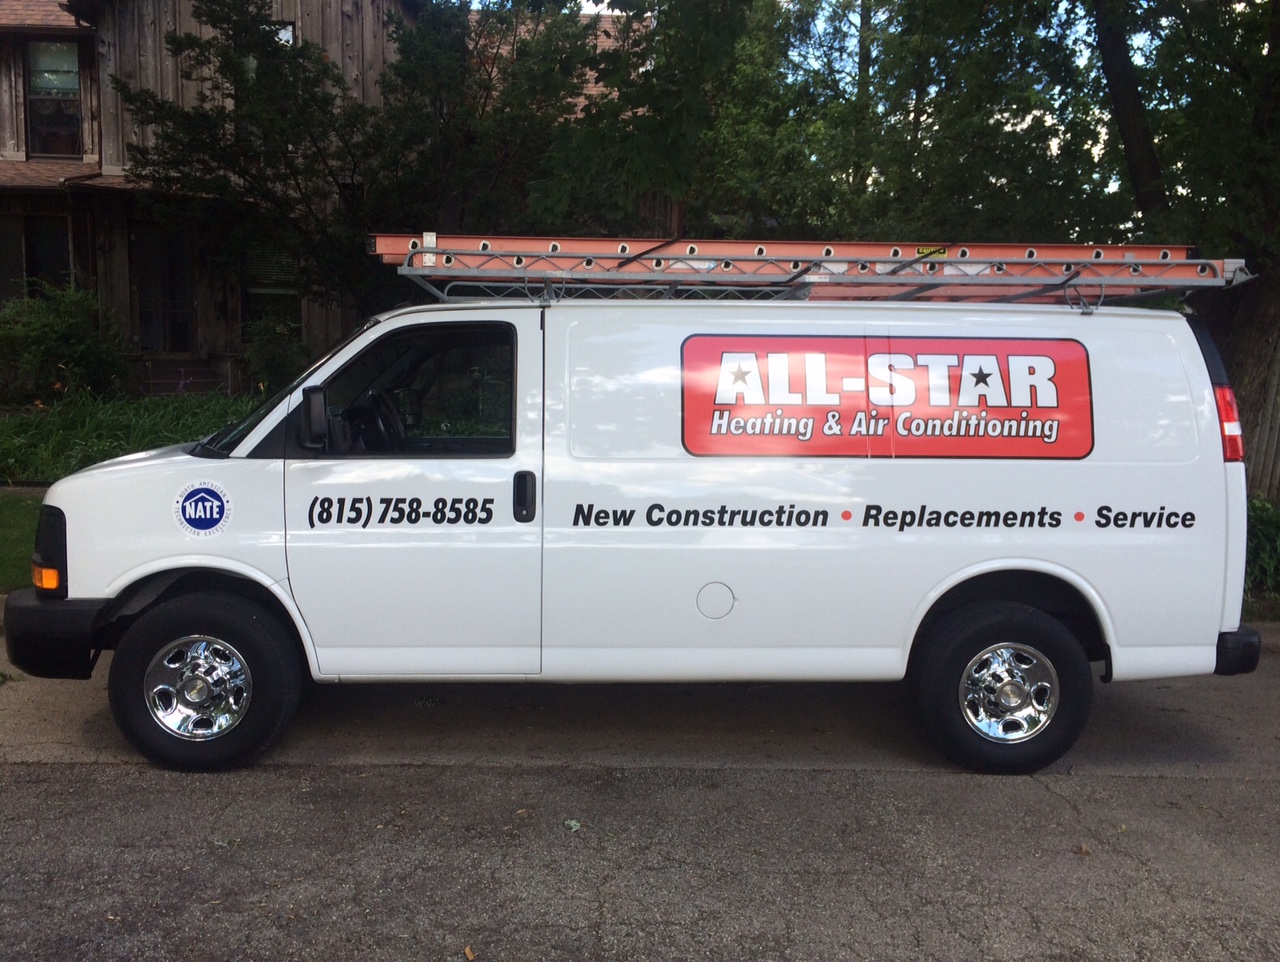 All-Star Heating & Air Conditioning Inc.